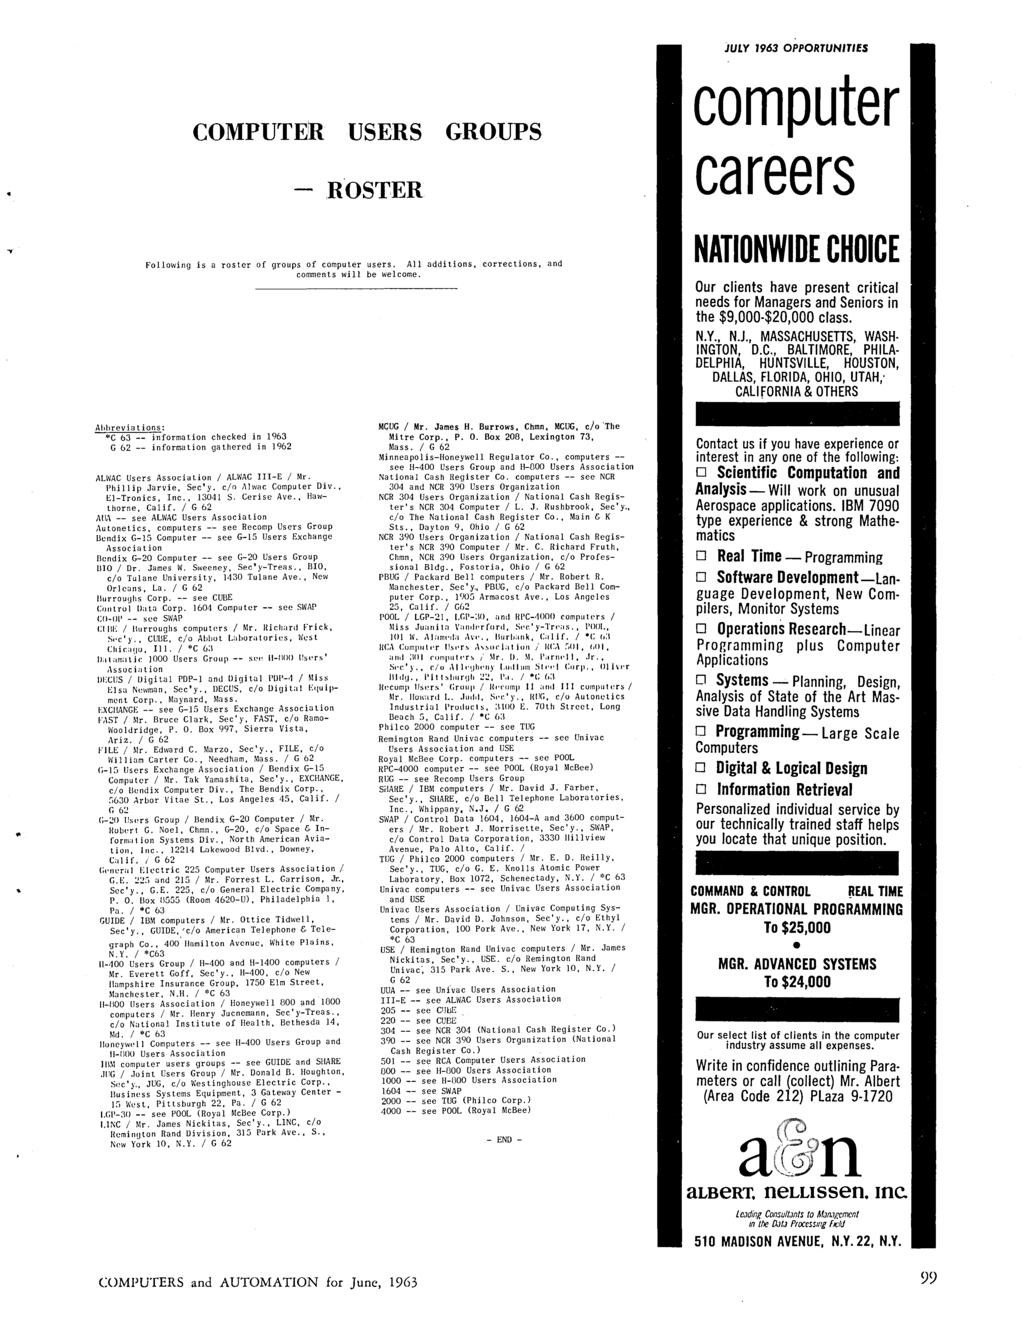 JULY 1963 OPPORTUNITIES COMPUTEIR USERS GROUPS computer careers Following is a roster of groups of computer users. All additions, corrections, and comments will be welcome.